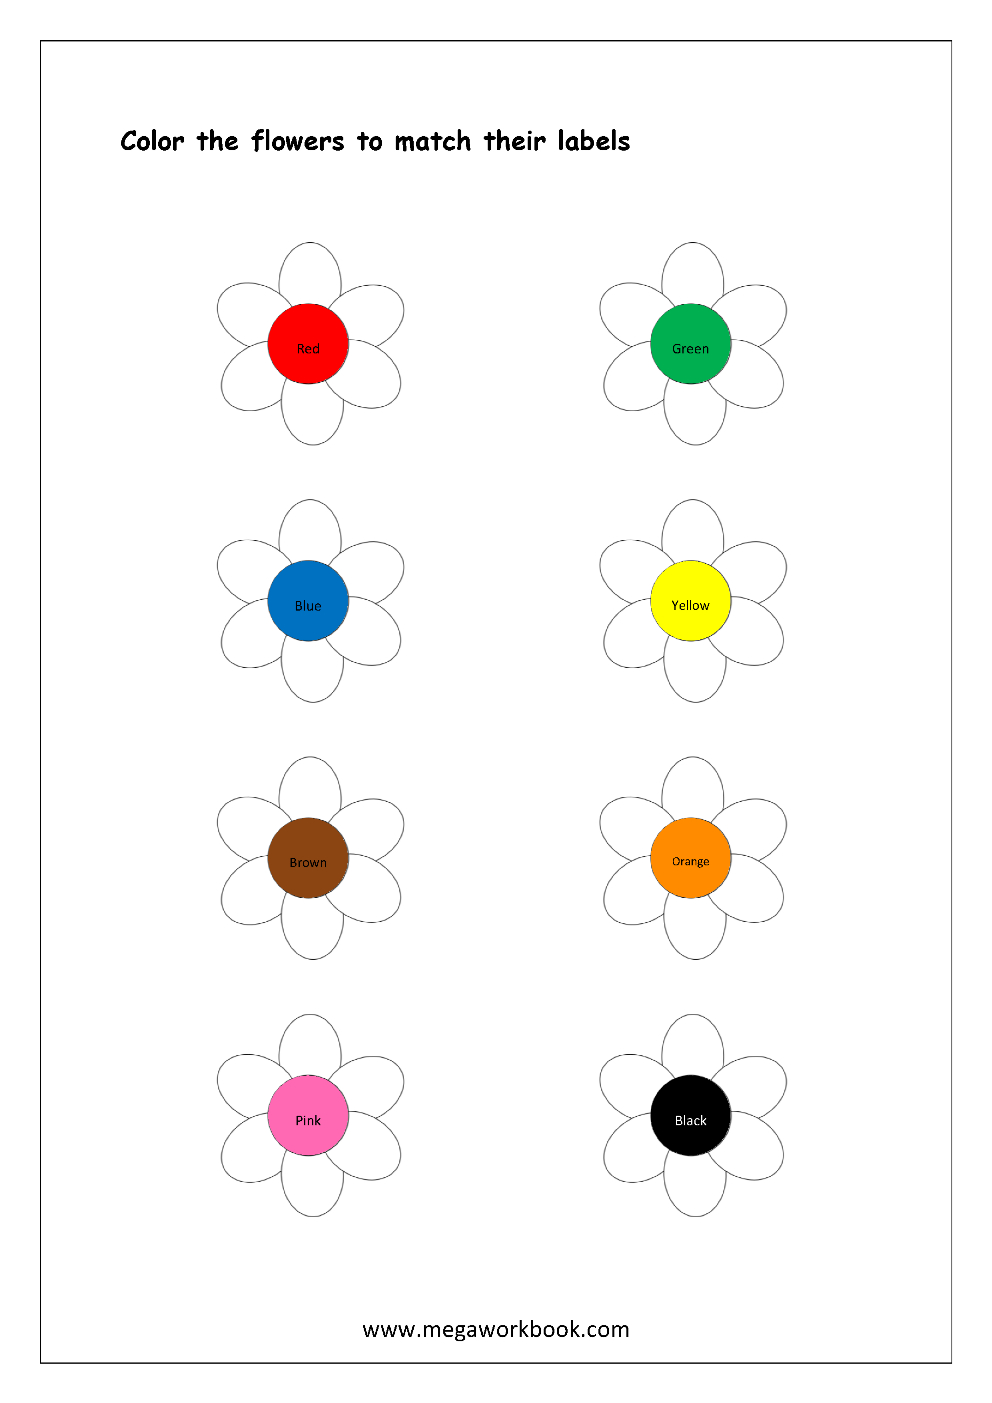 Free Printable Color Recognition Worksheets - Colormatching throughout Color Recognition Worksheets Free Printable